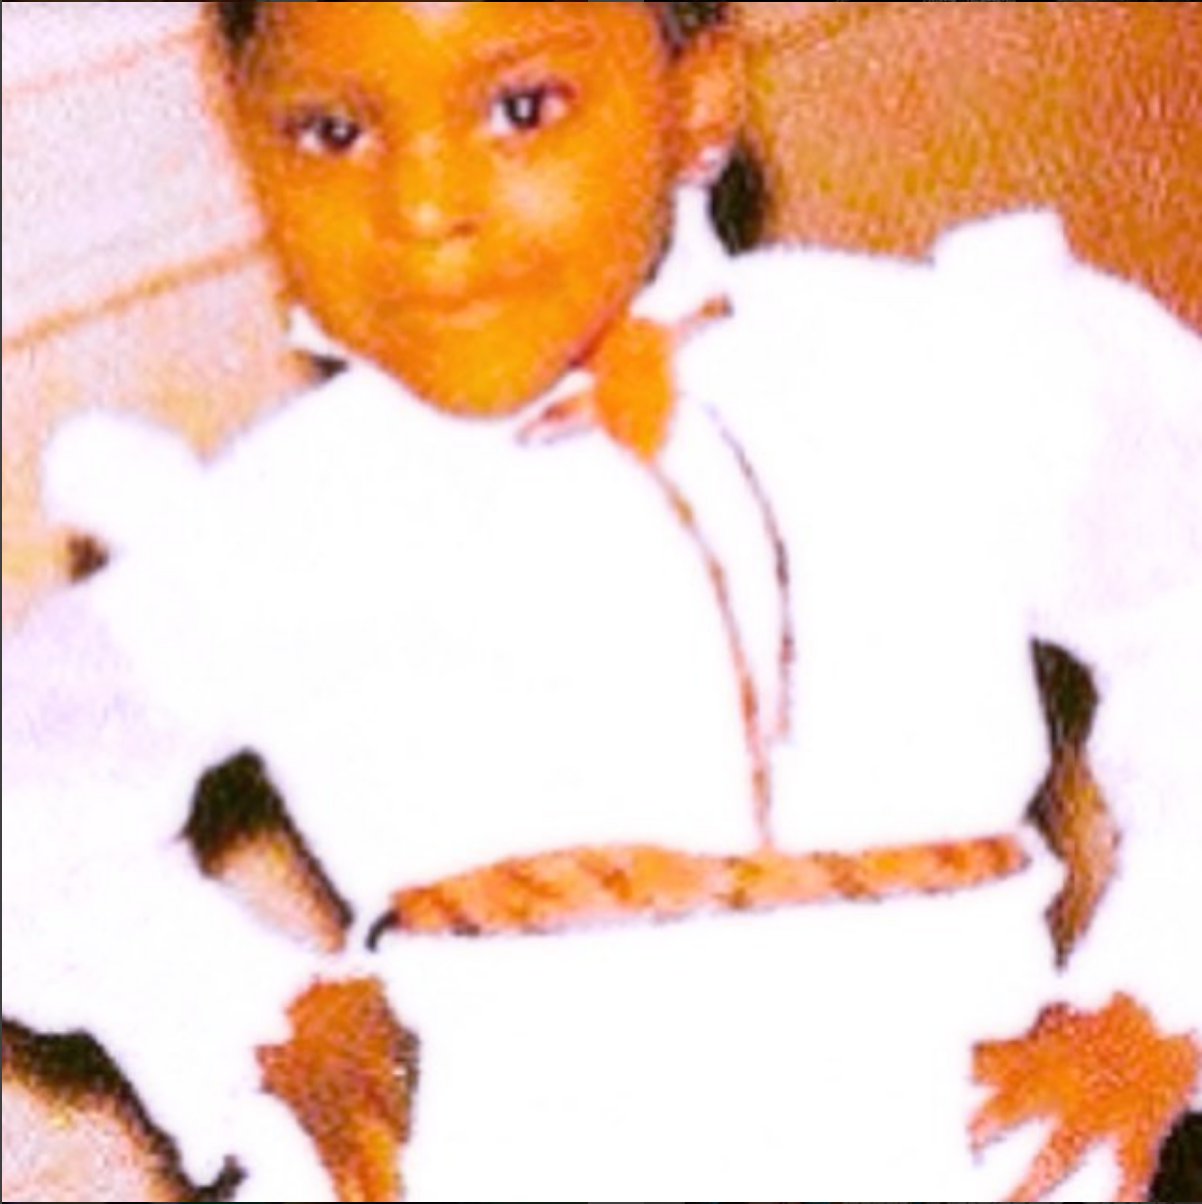 12 Celebrity Childhood Photos That Will Make You Say 'Awwwww'
